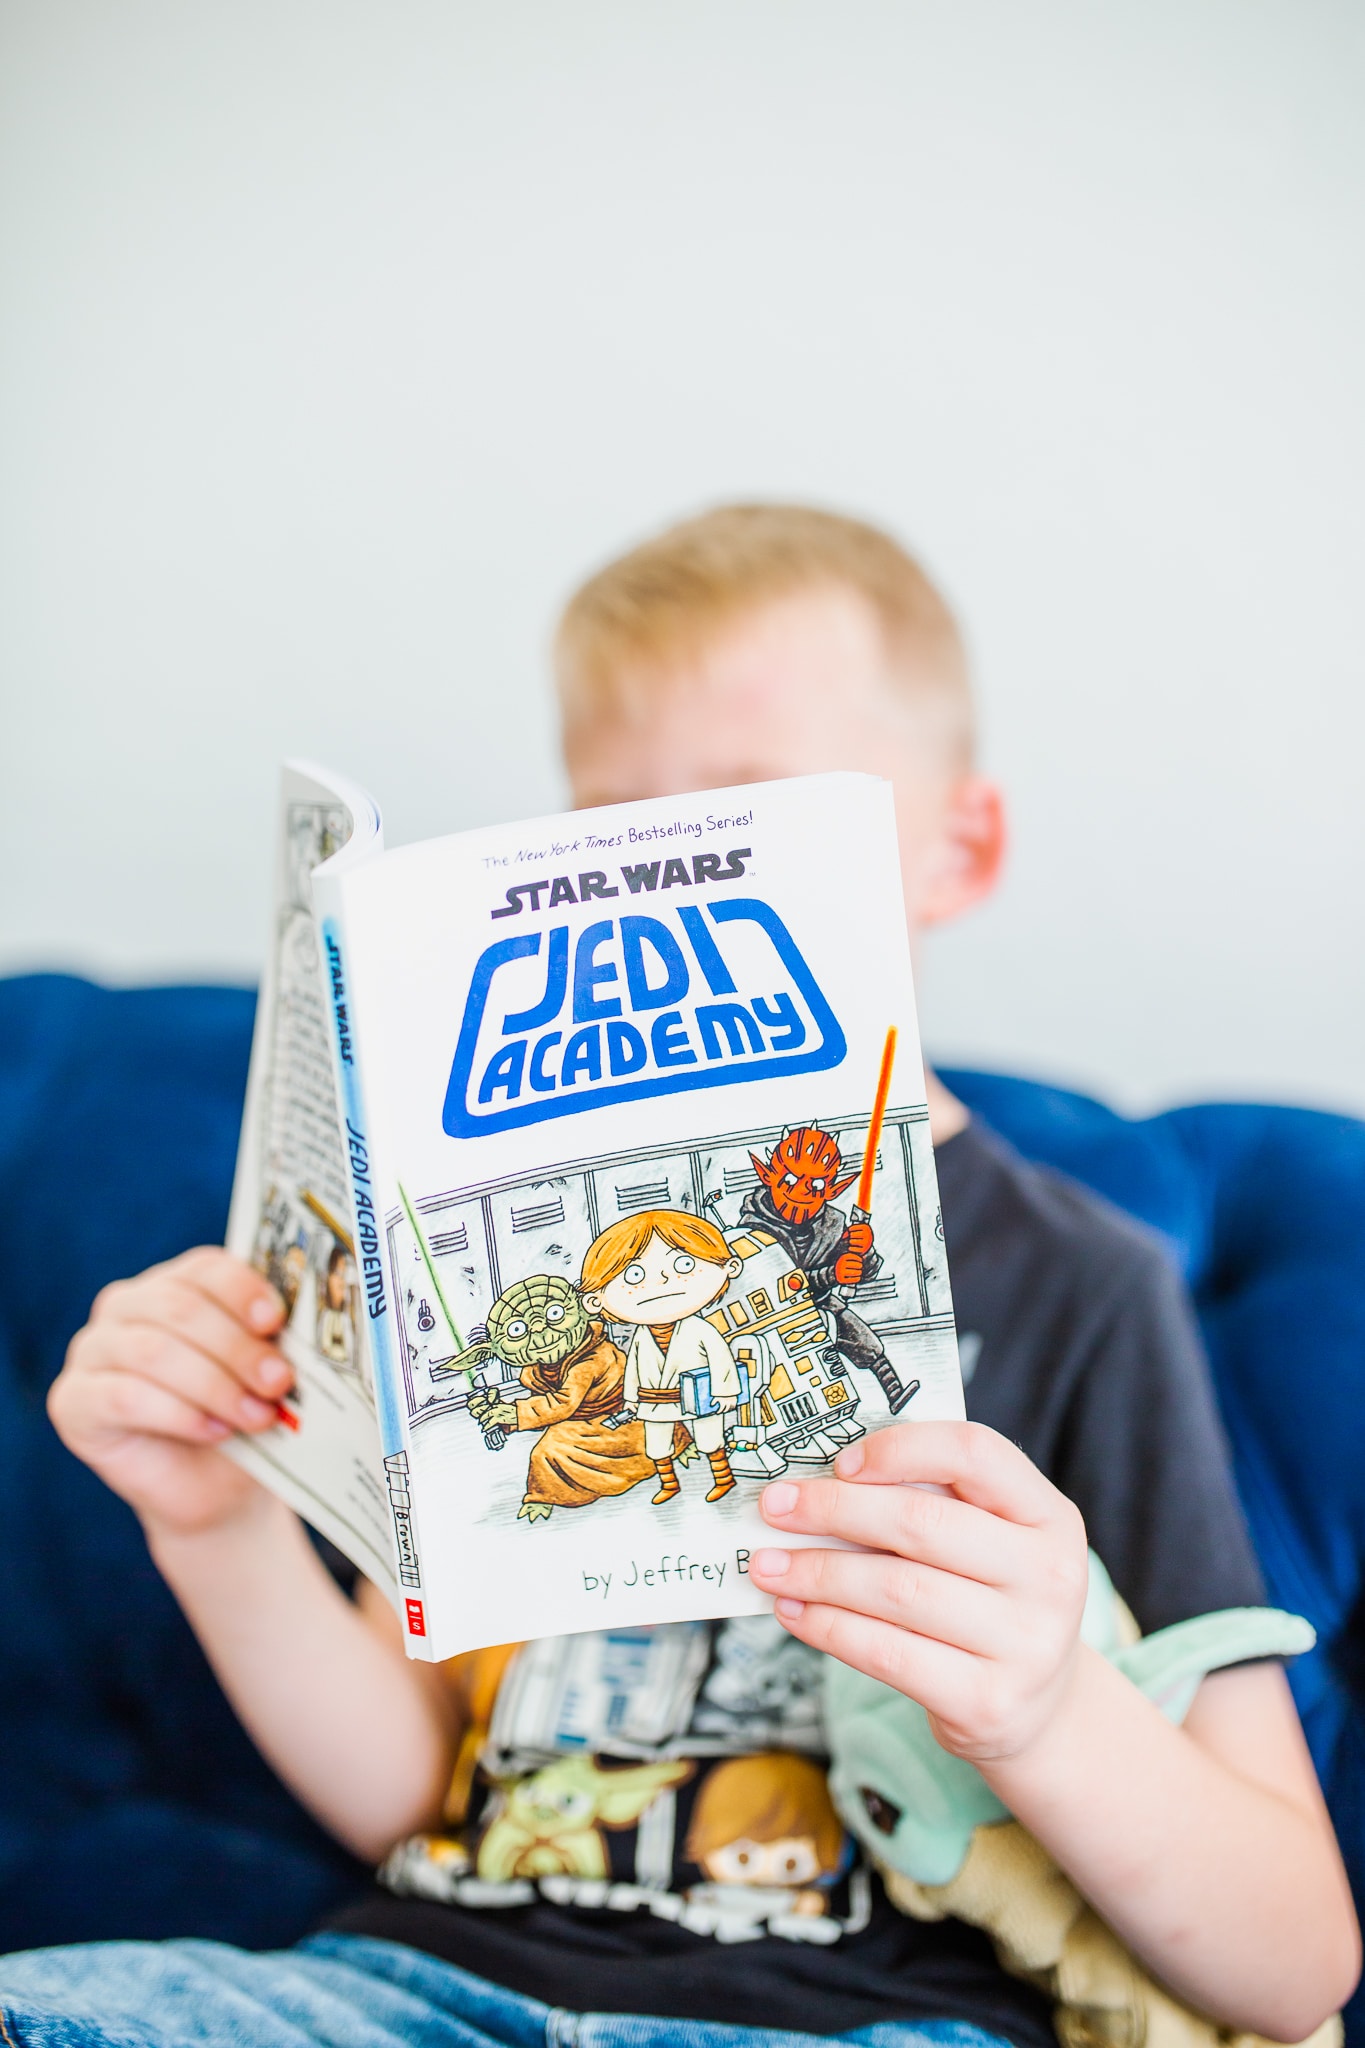 The Best Star Wars Books for Kids